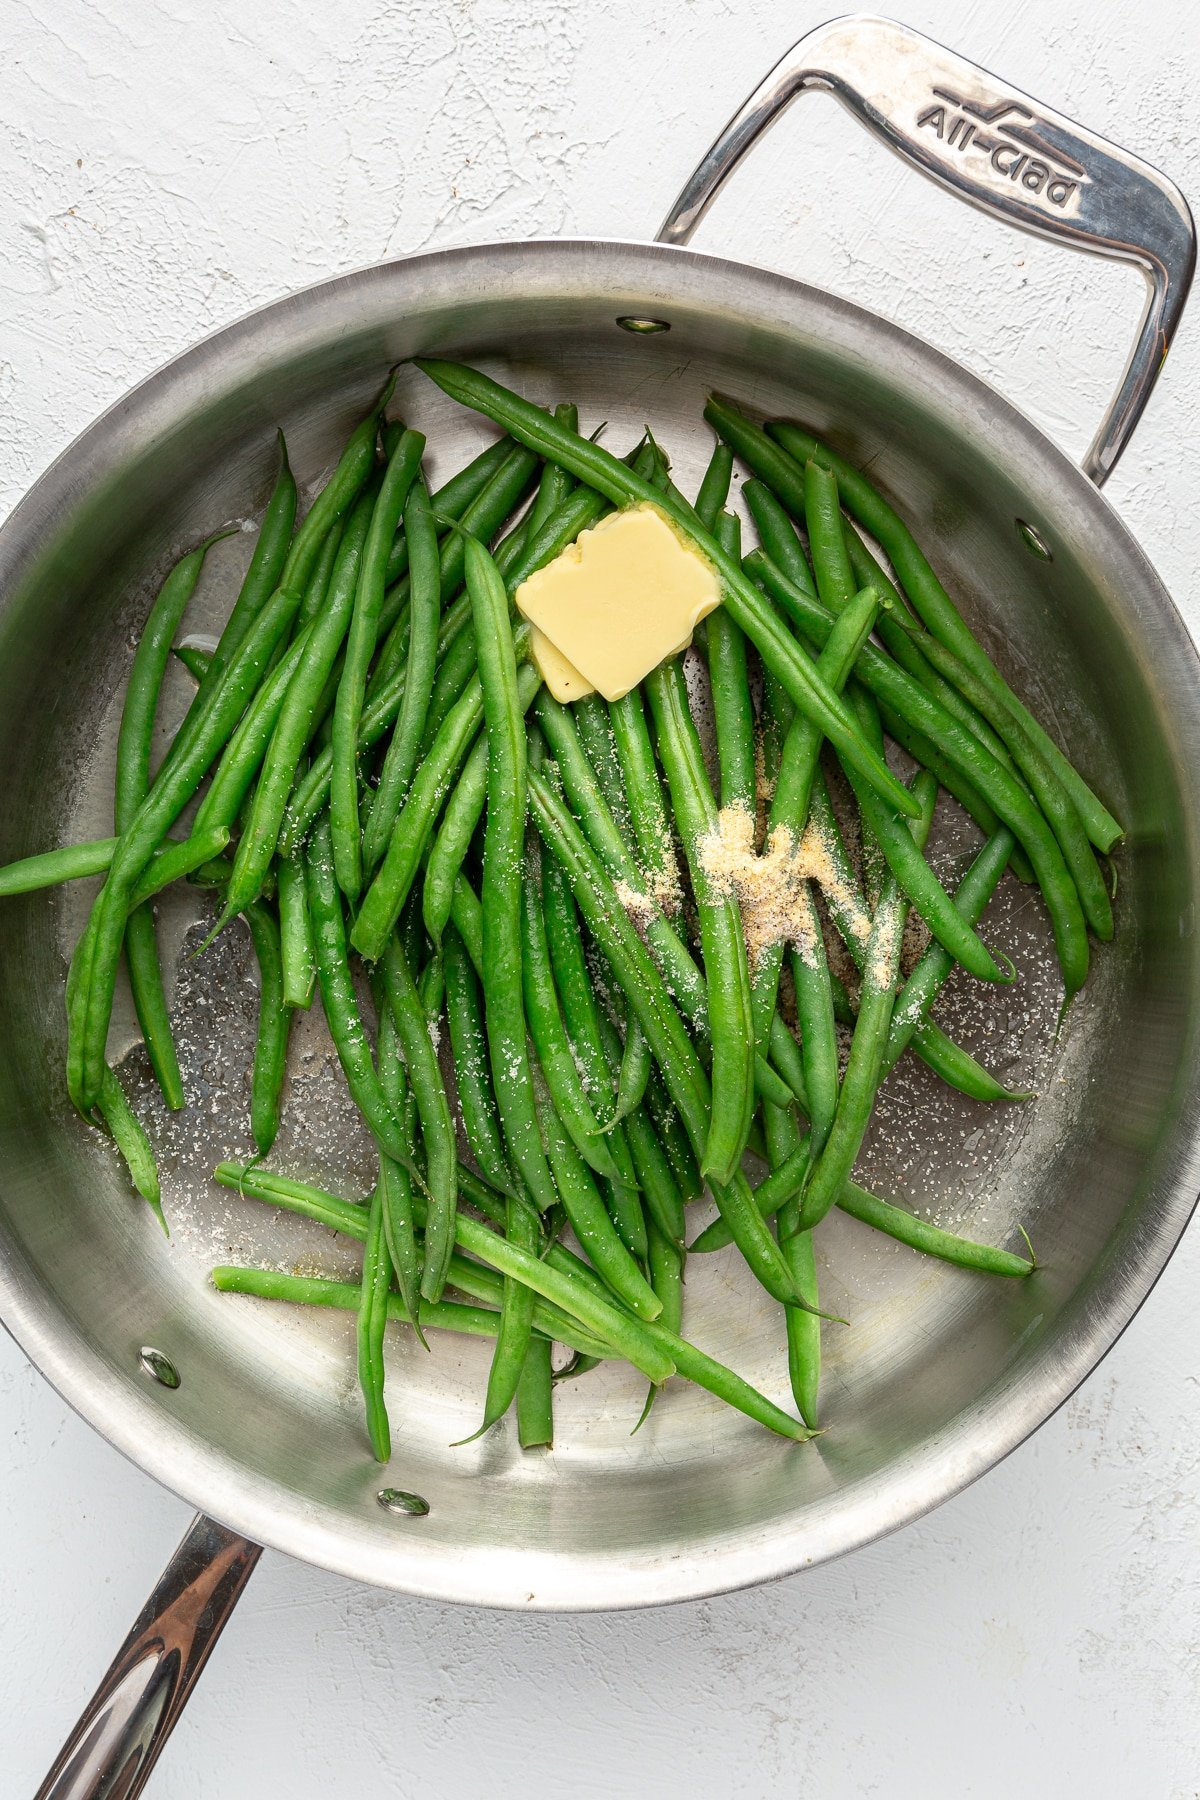 A variety of seasoning and butter have been added on top of the green beans.